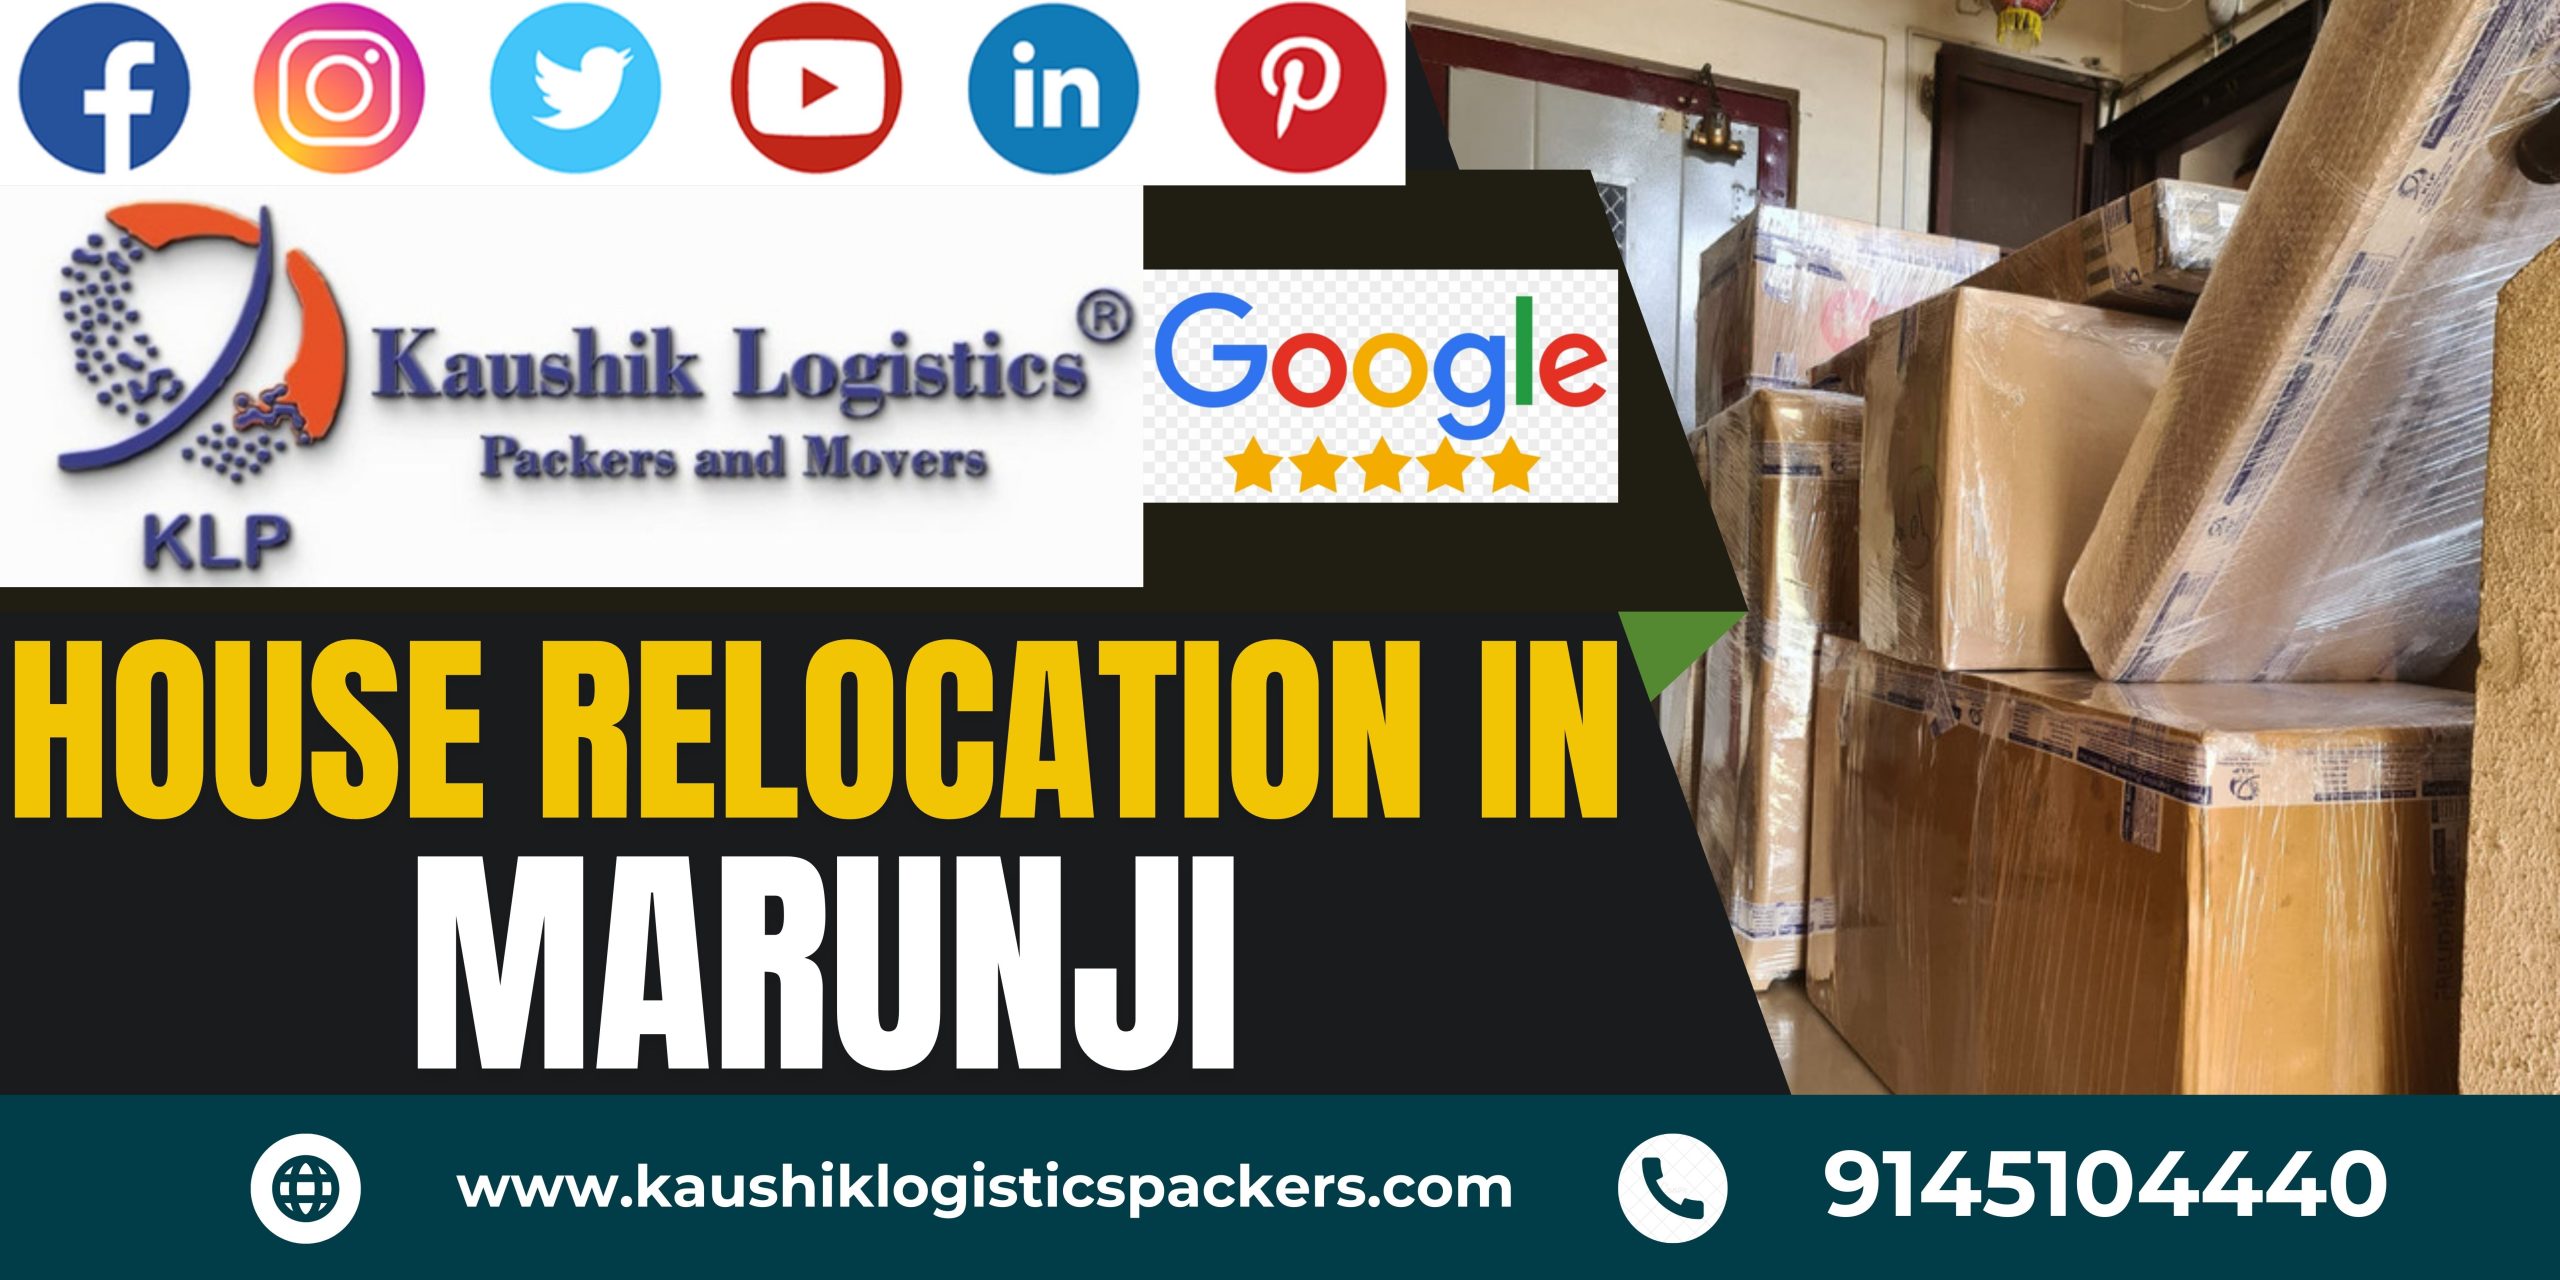 Packers and Movers In Marunji